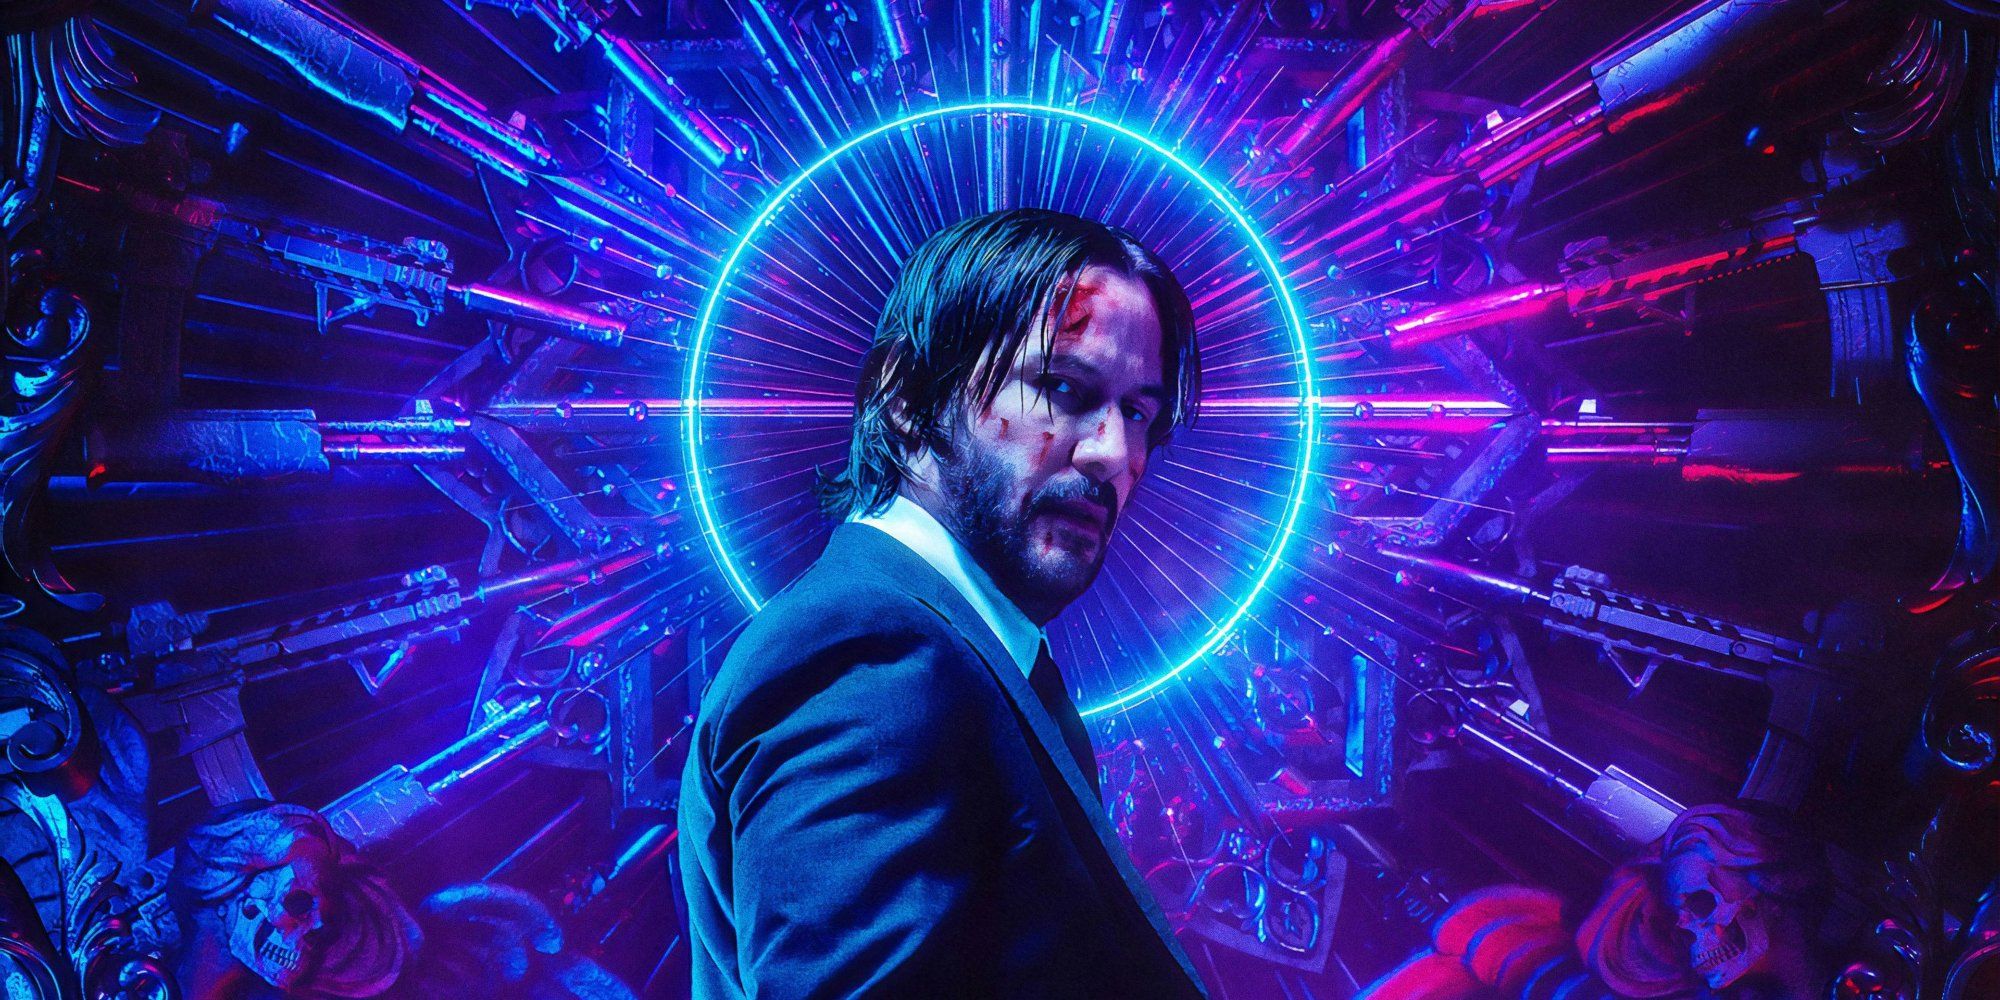 Why is everyone after John Wick 3?